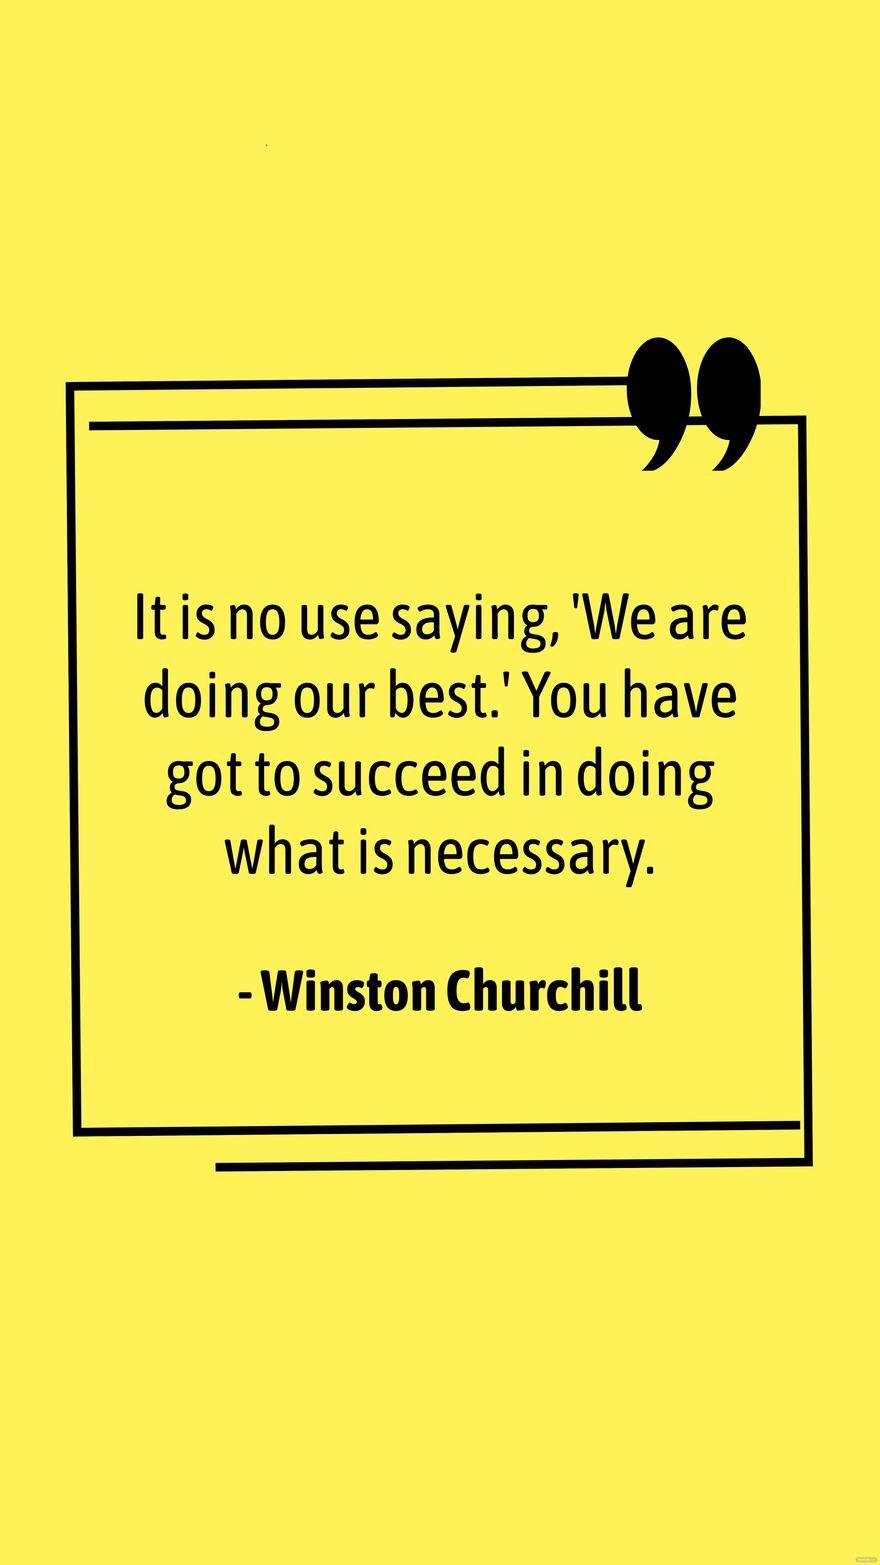 Winston Churchill - It is no use saying, 'We are doing our best.' You have got to succeed in doing what is necessary.